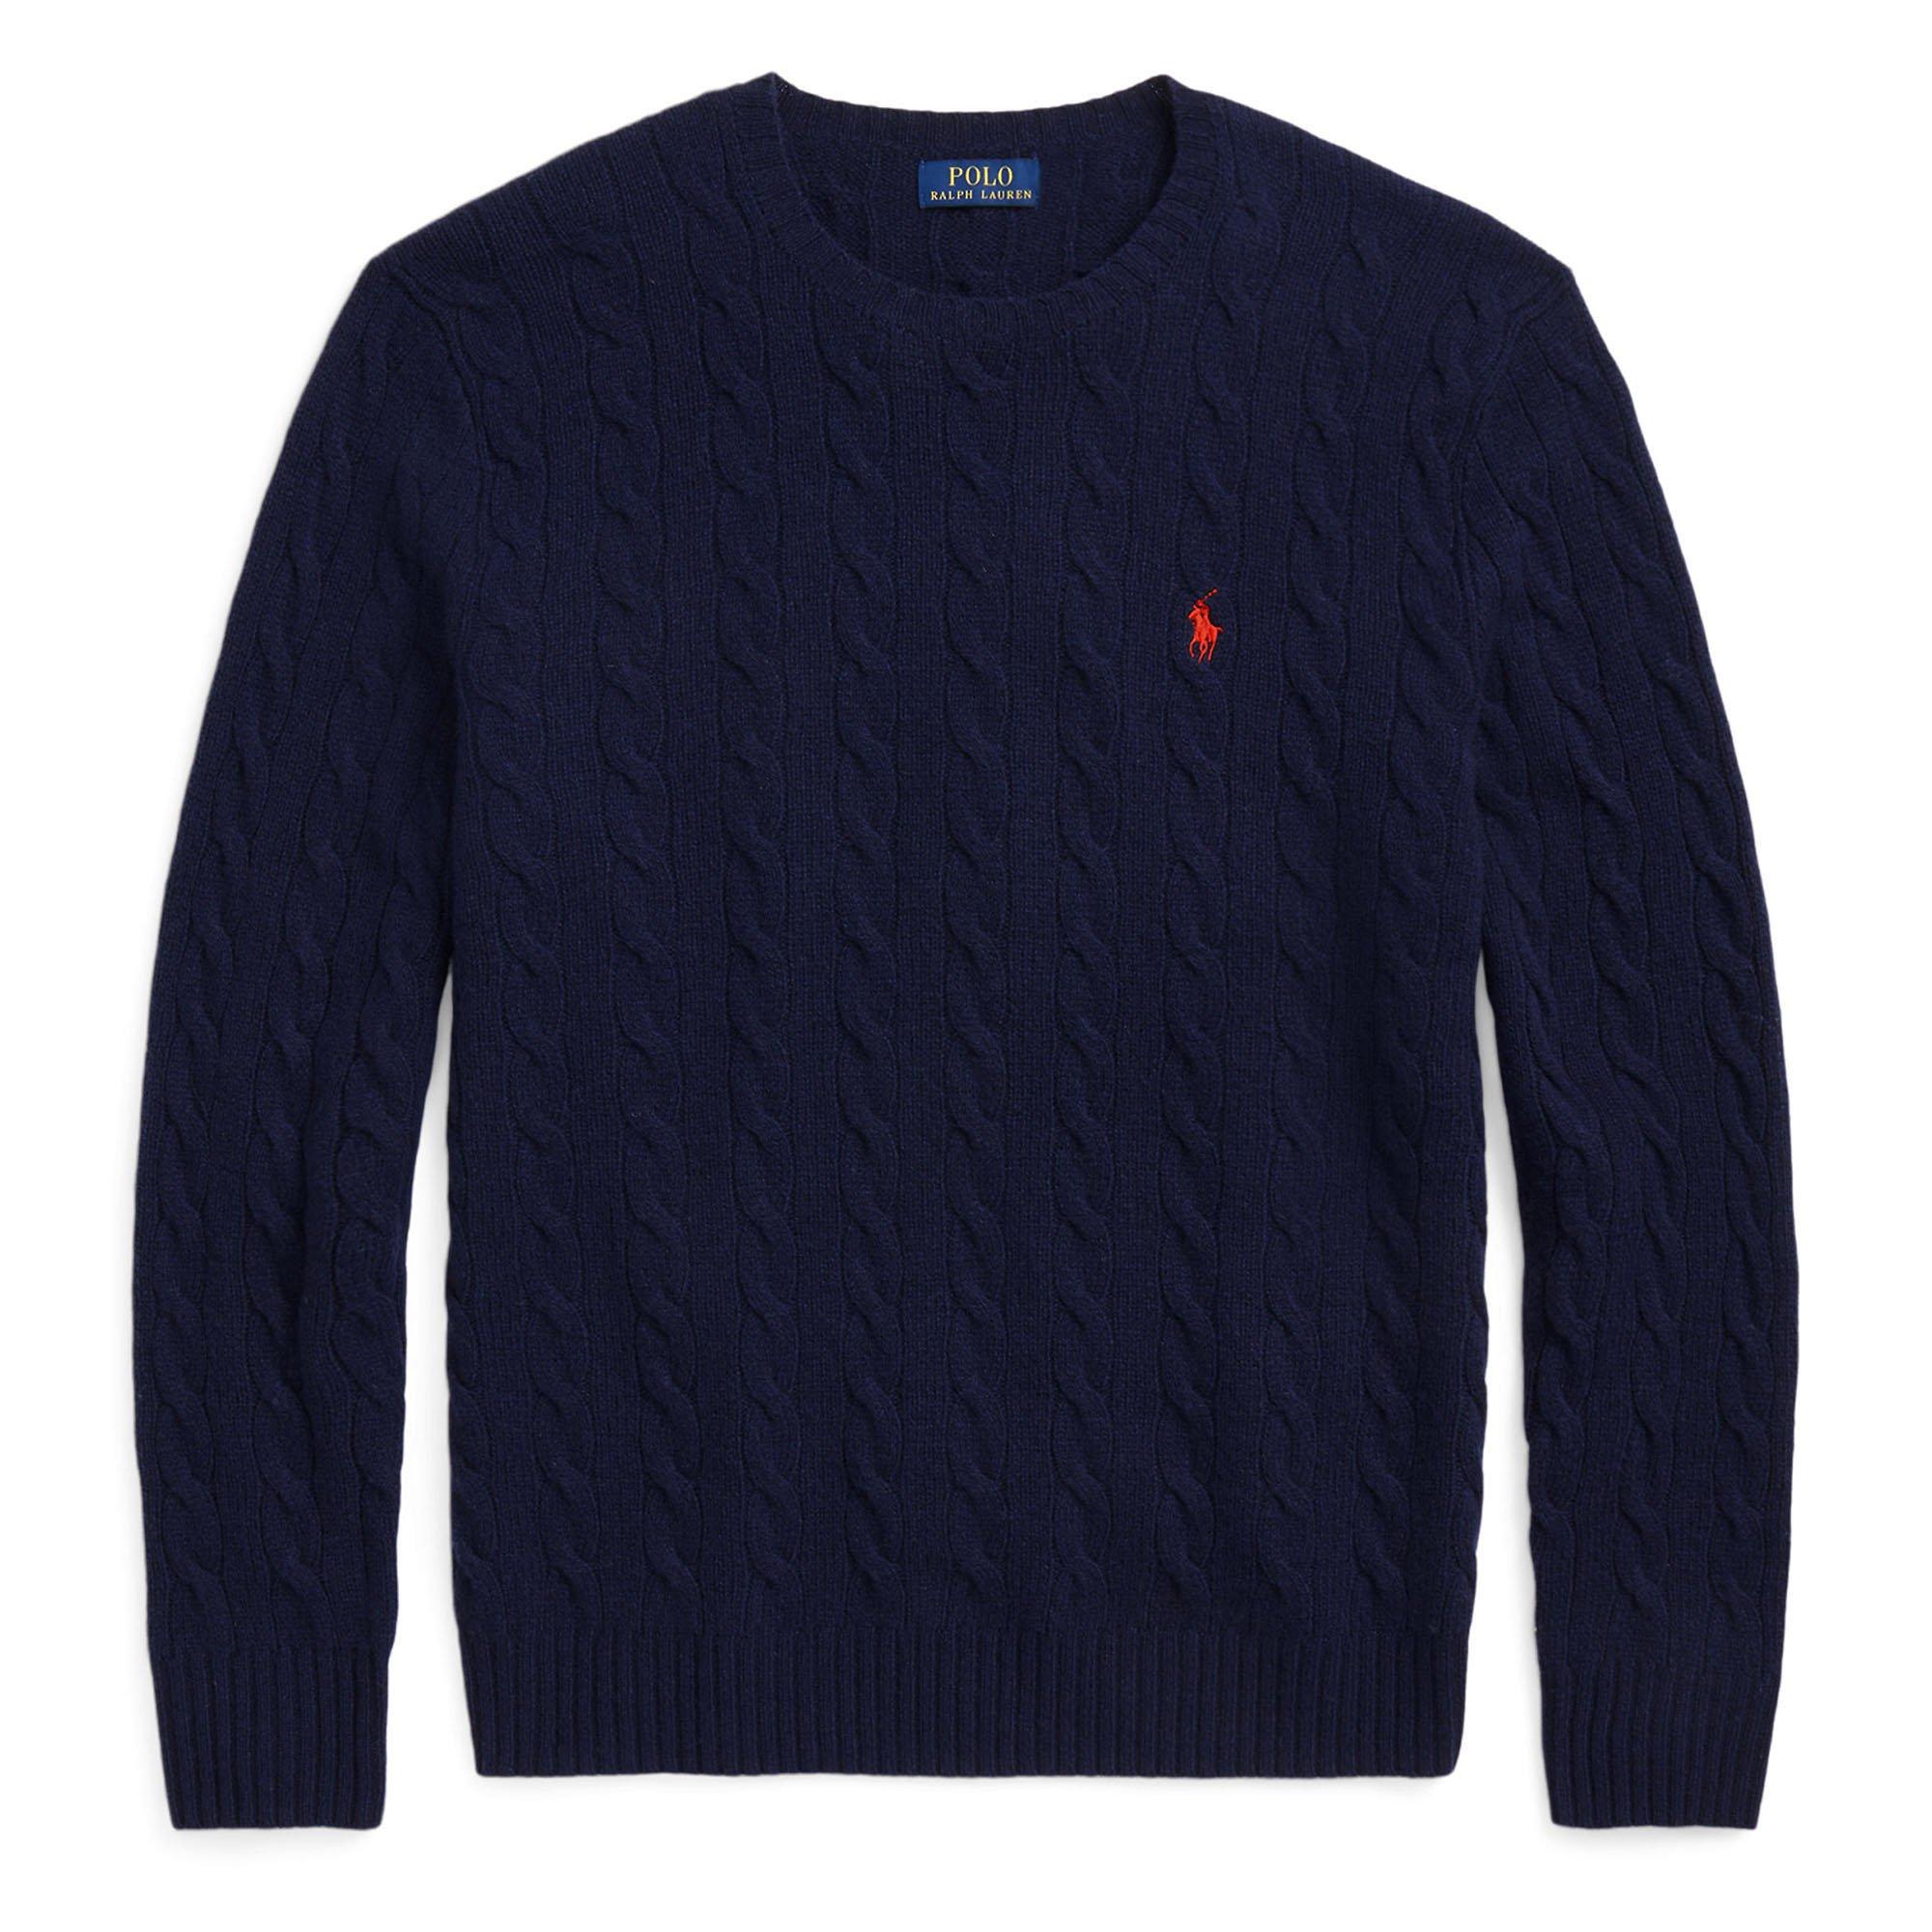 Polo Ralph Lauren Cable-Knit Wool-Cashmere Sweater - Blue - Size XL